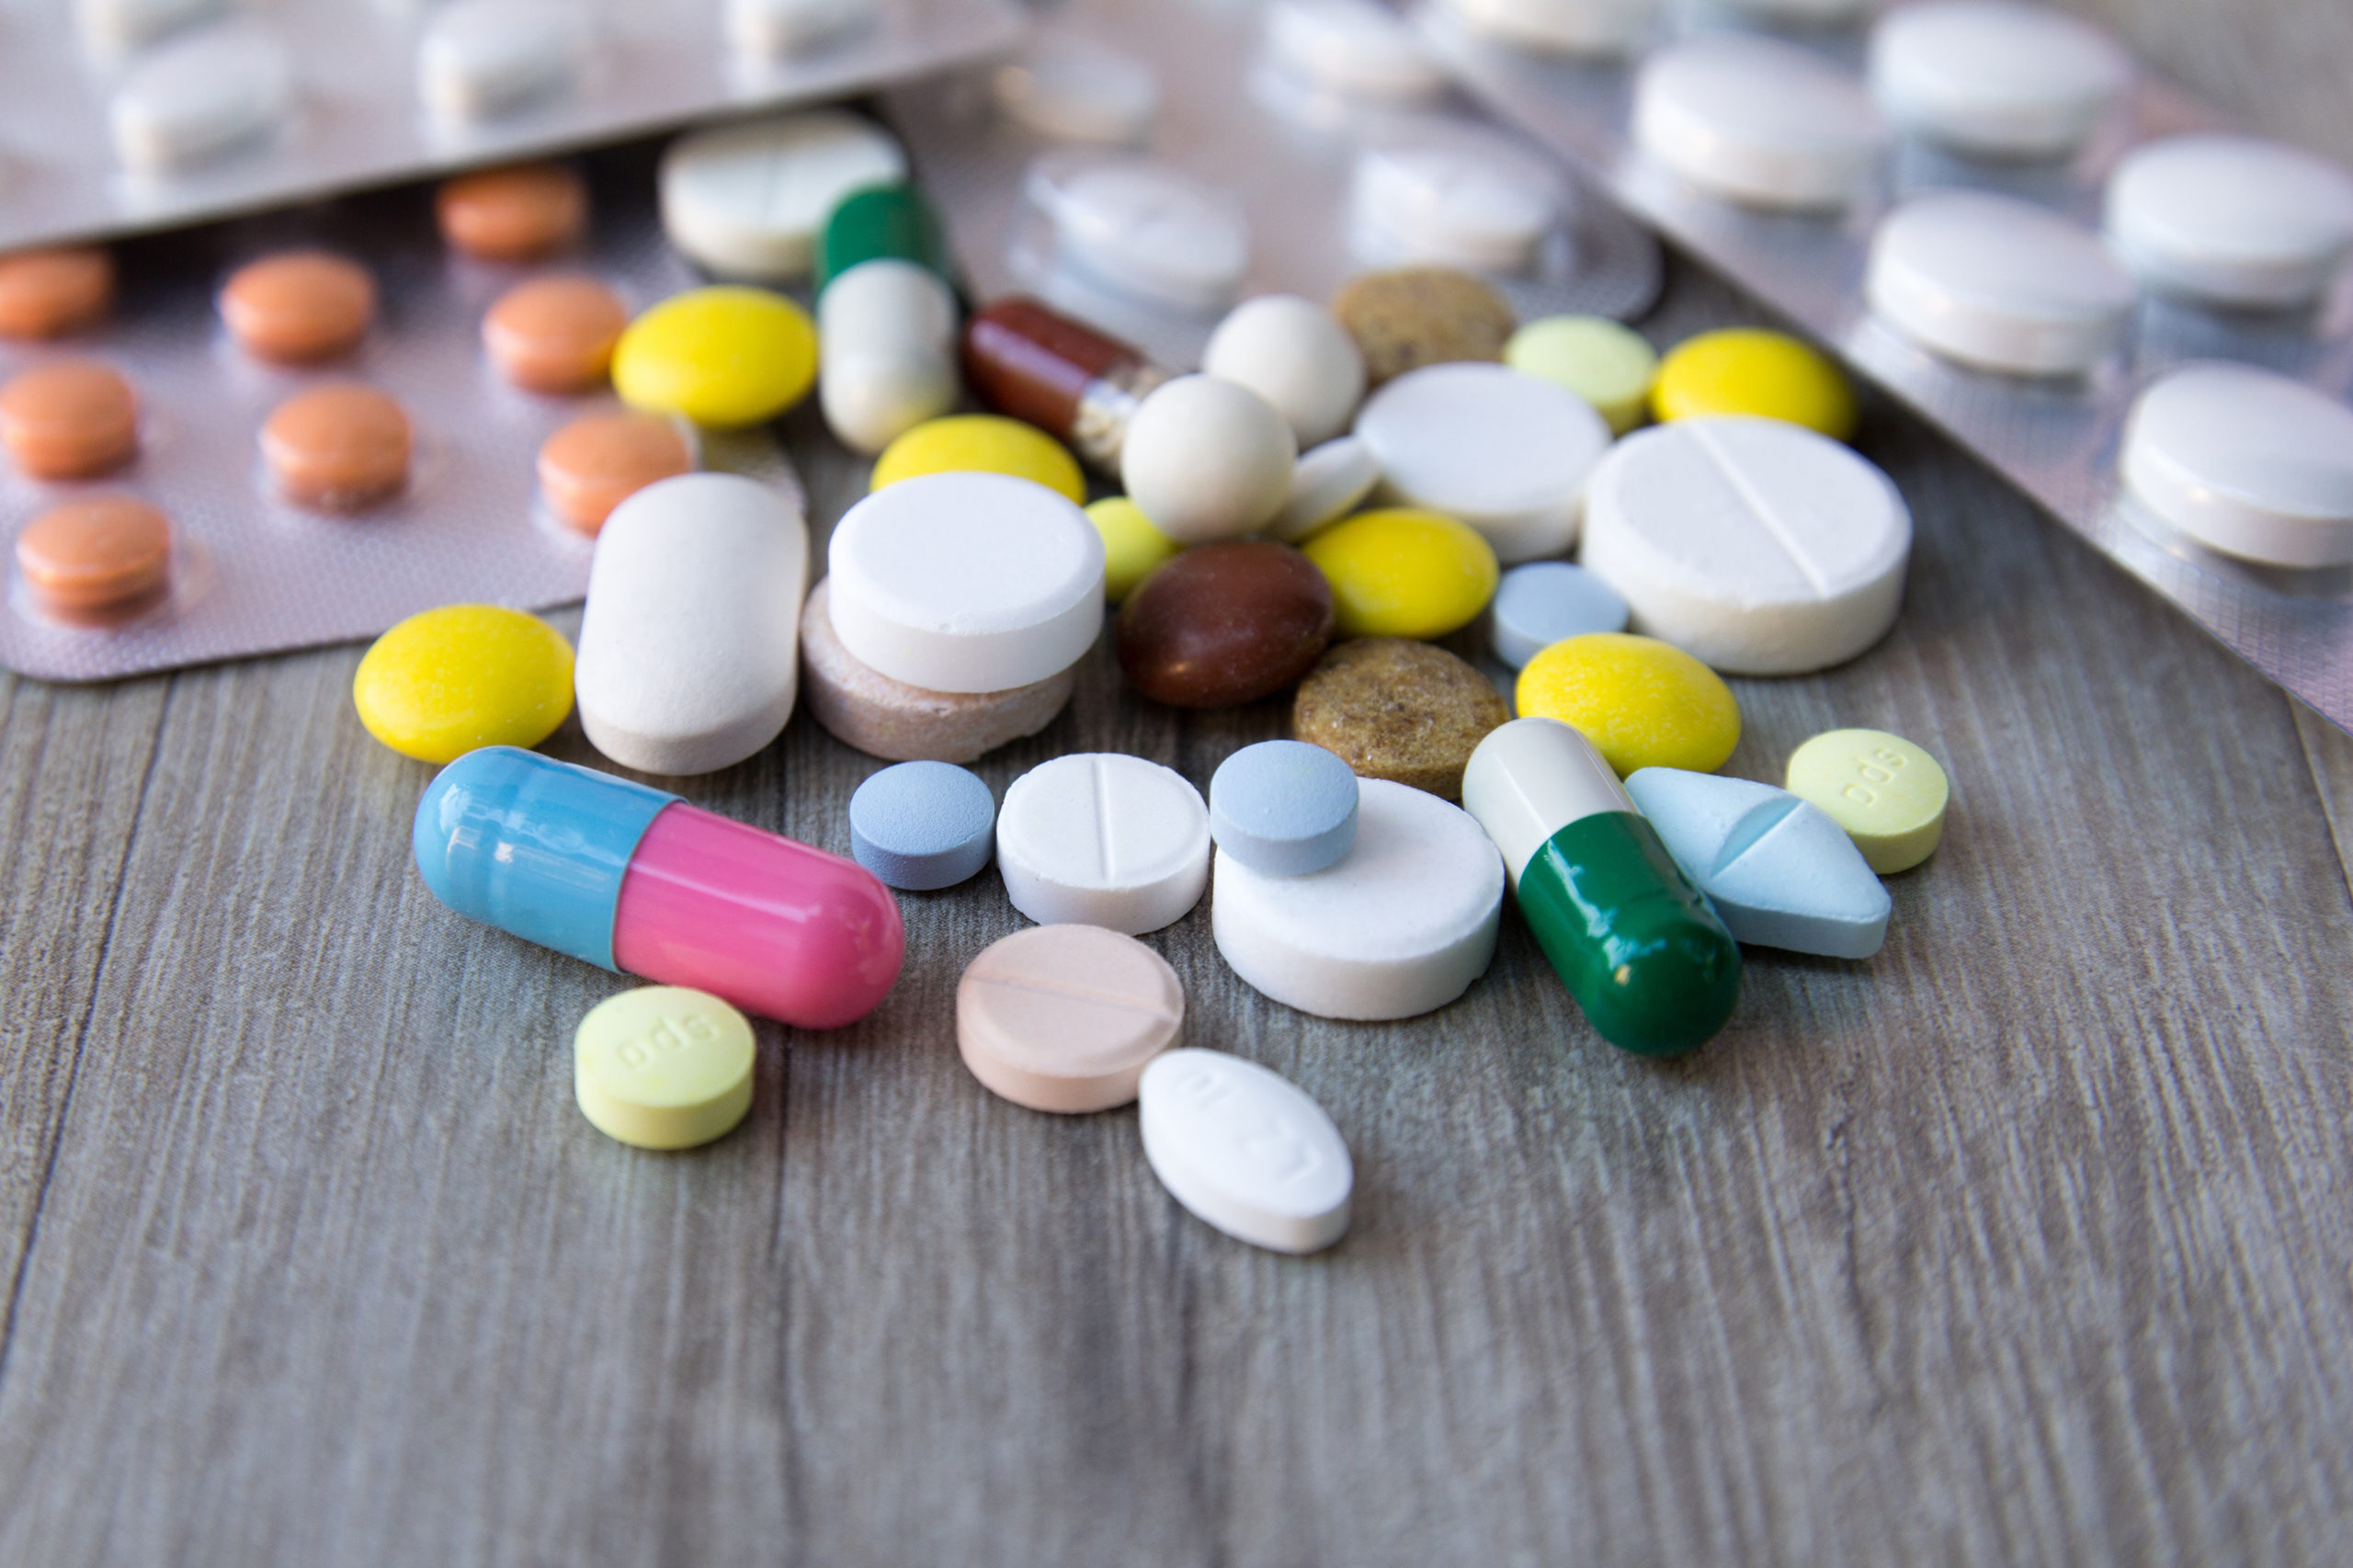 Why is Prescription Drug Abuse so Common?